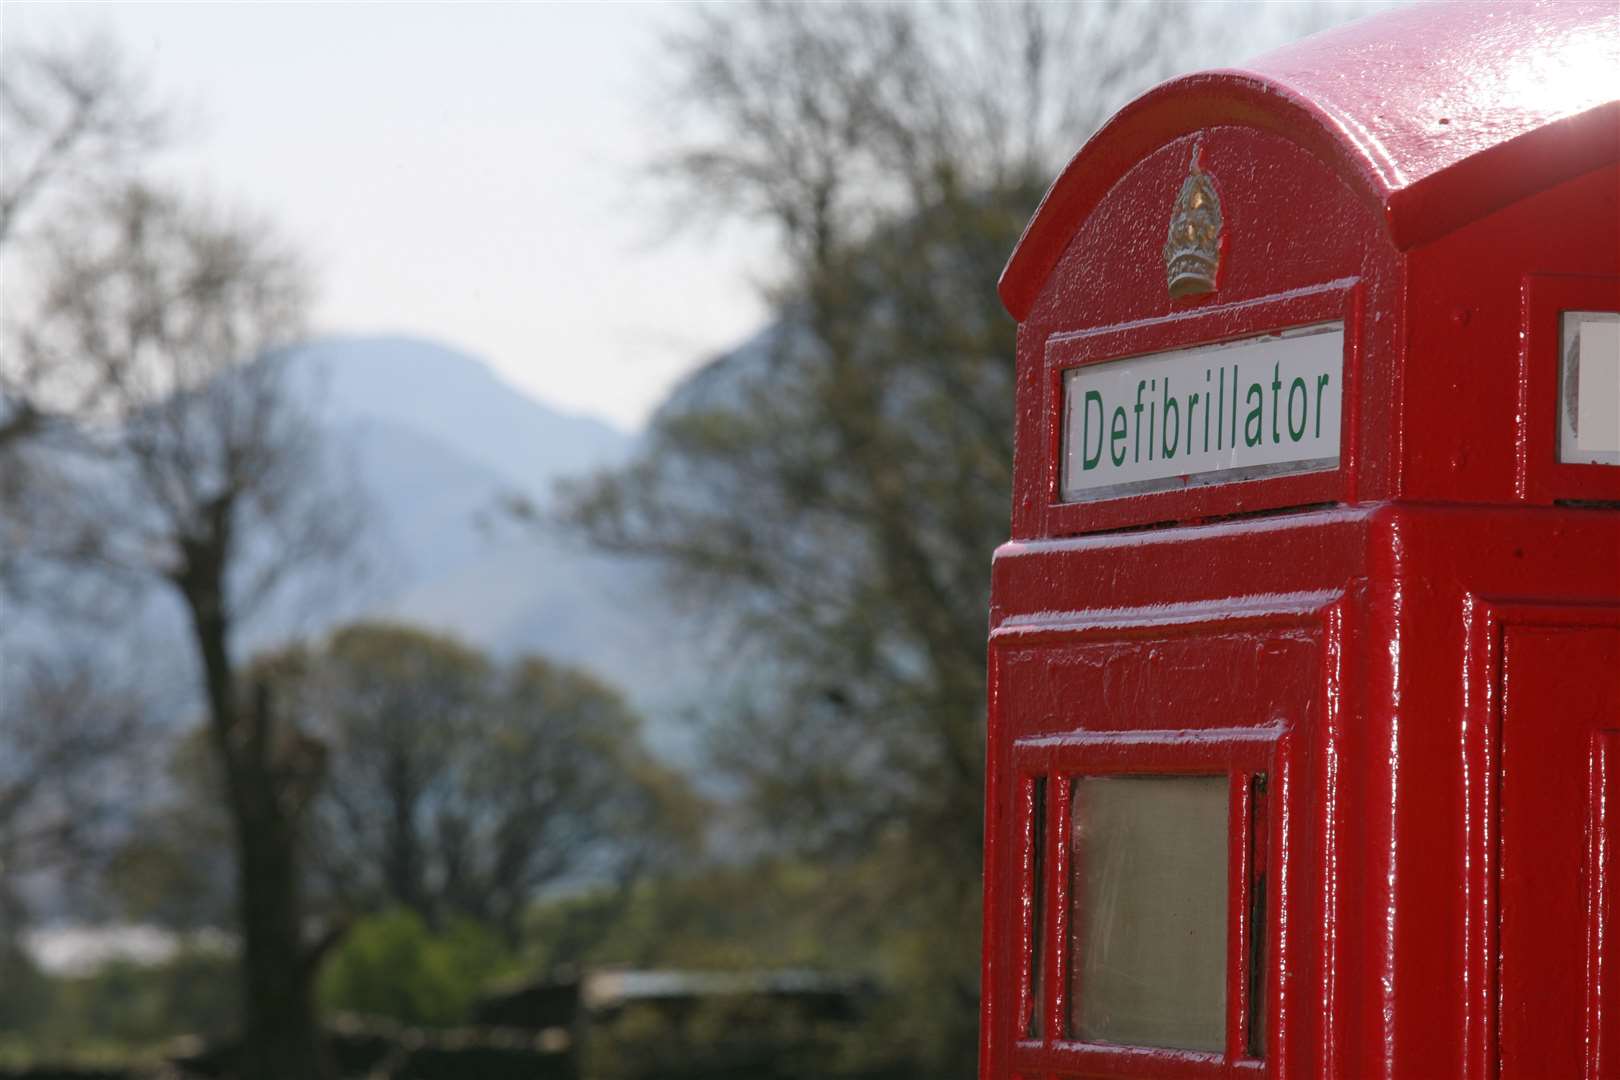 The 3,000th converted phone box - it now houses a defibrillator